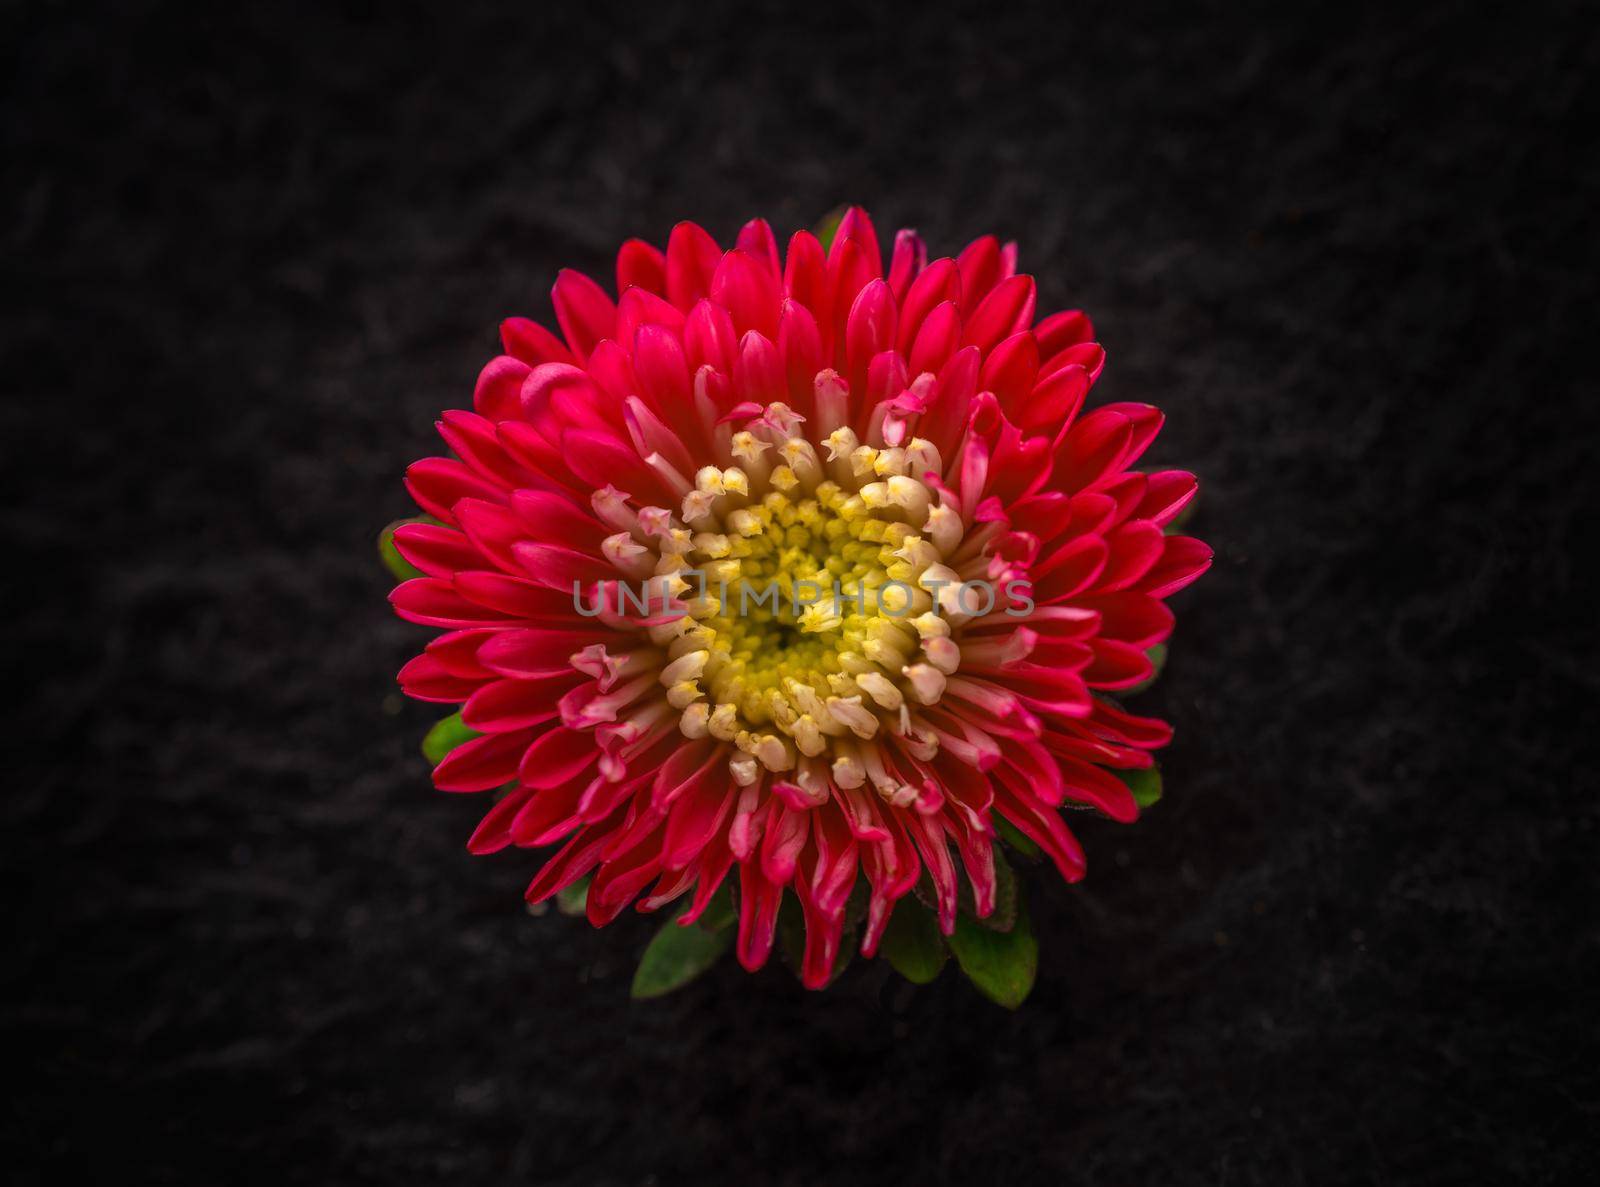 Top view of a flower on black background. Macro shoot.